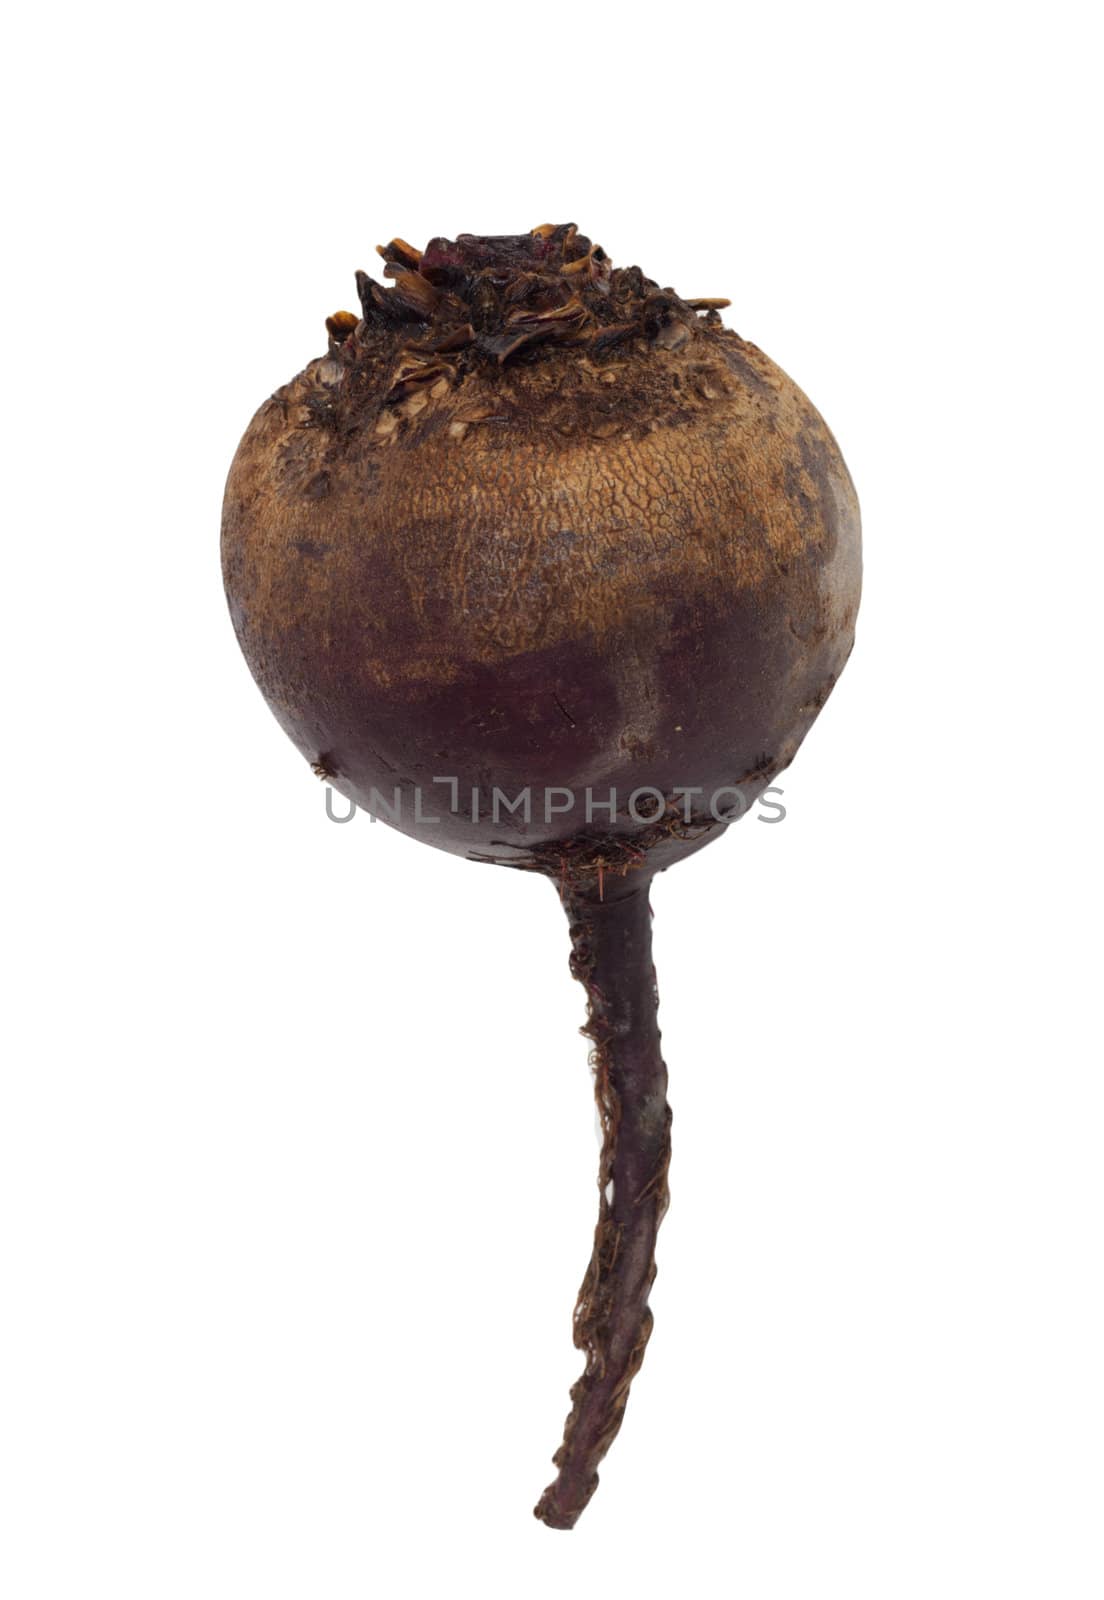 Image of beet on white background by schankz